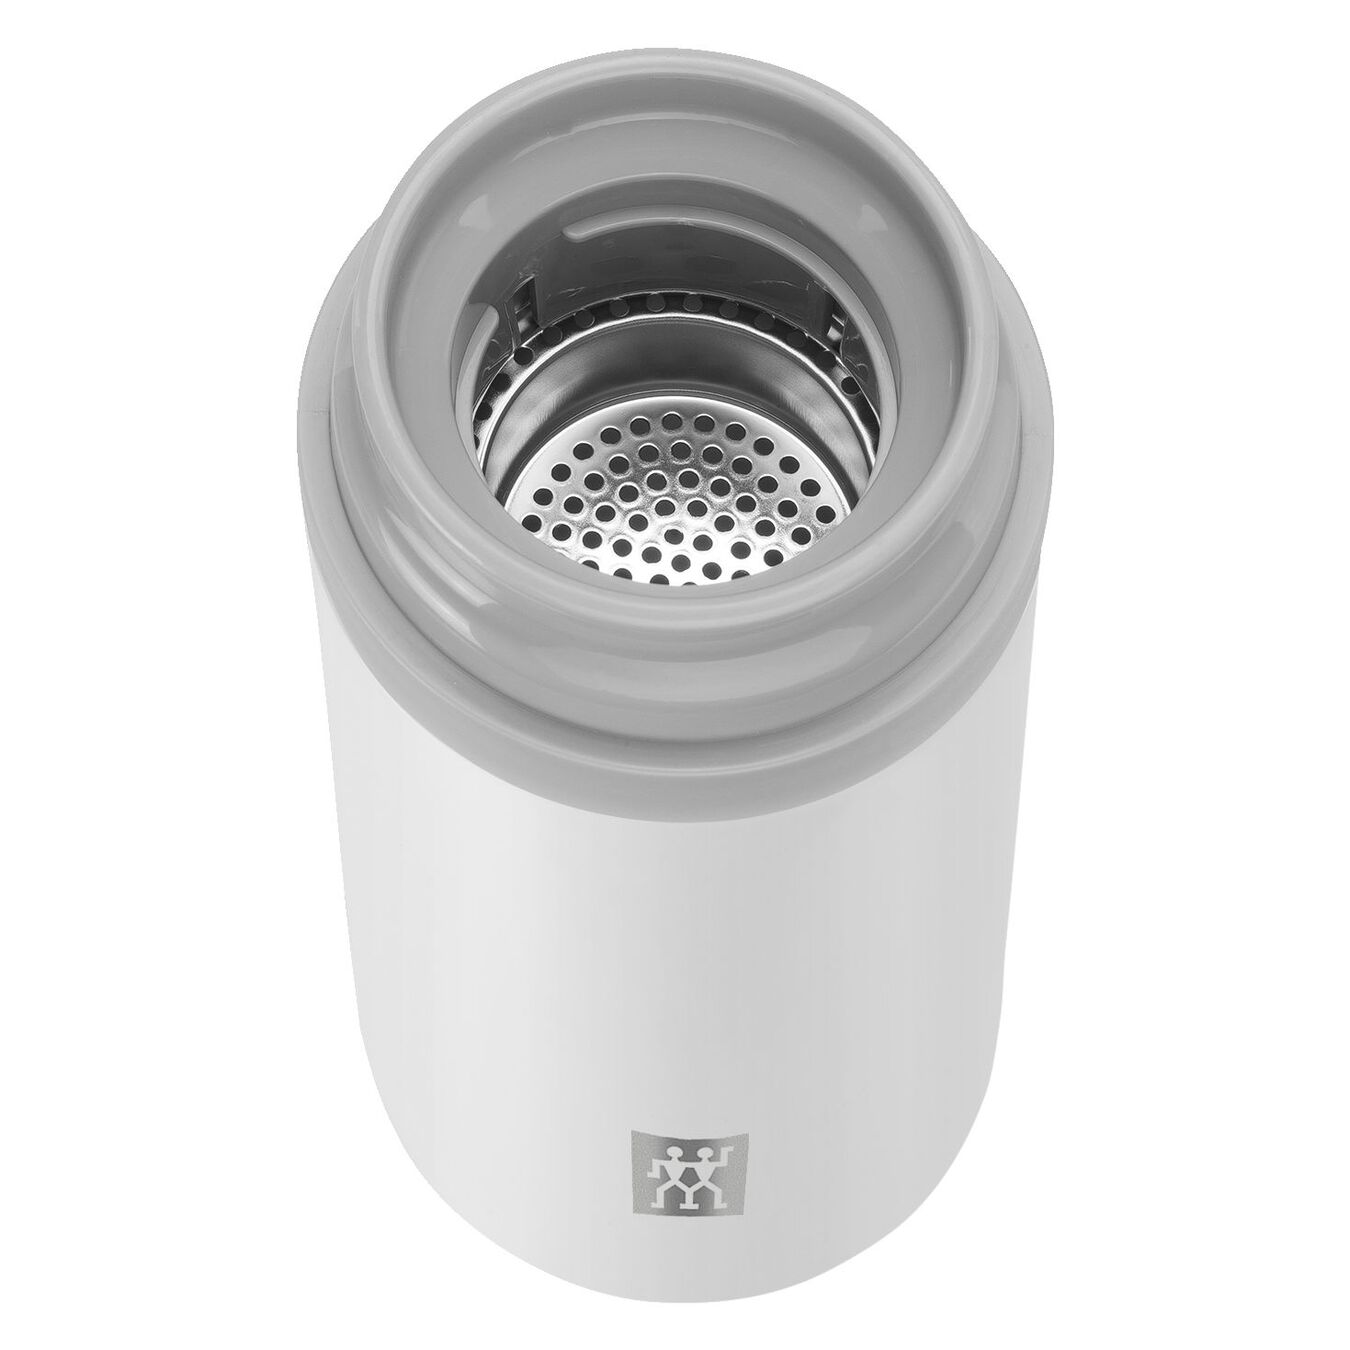 420 ml Thermo flask white-grey,,large 2